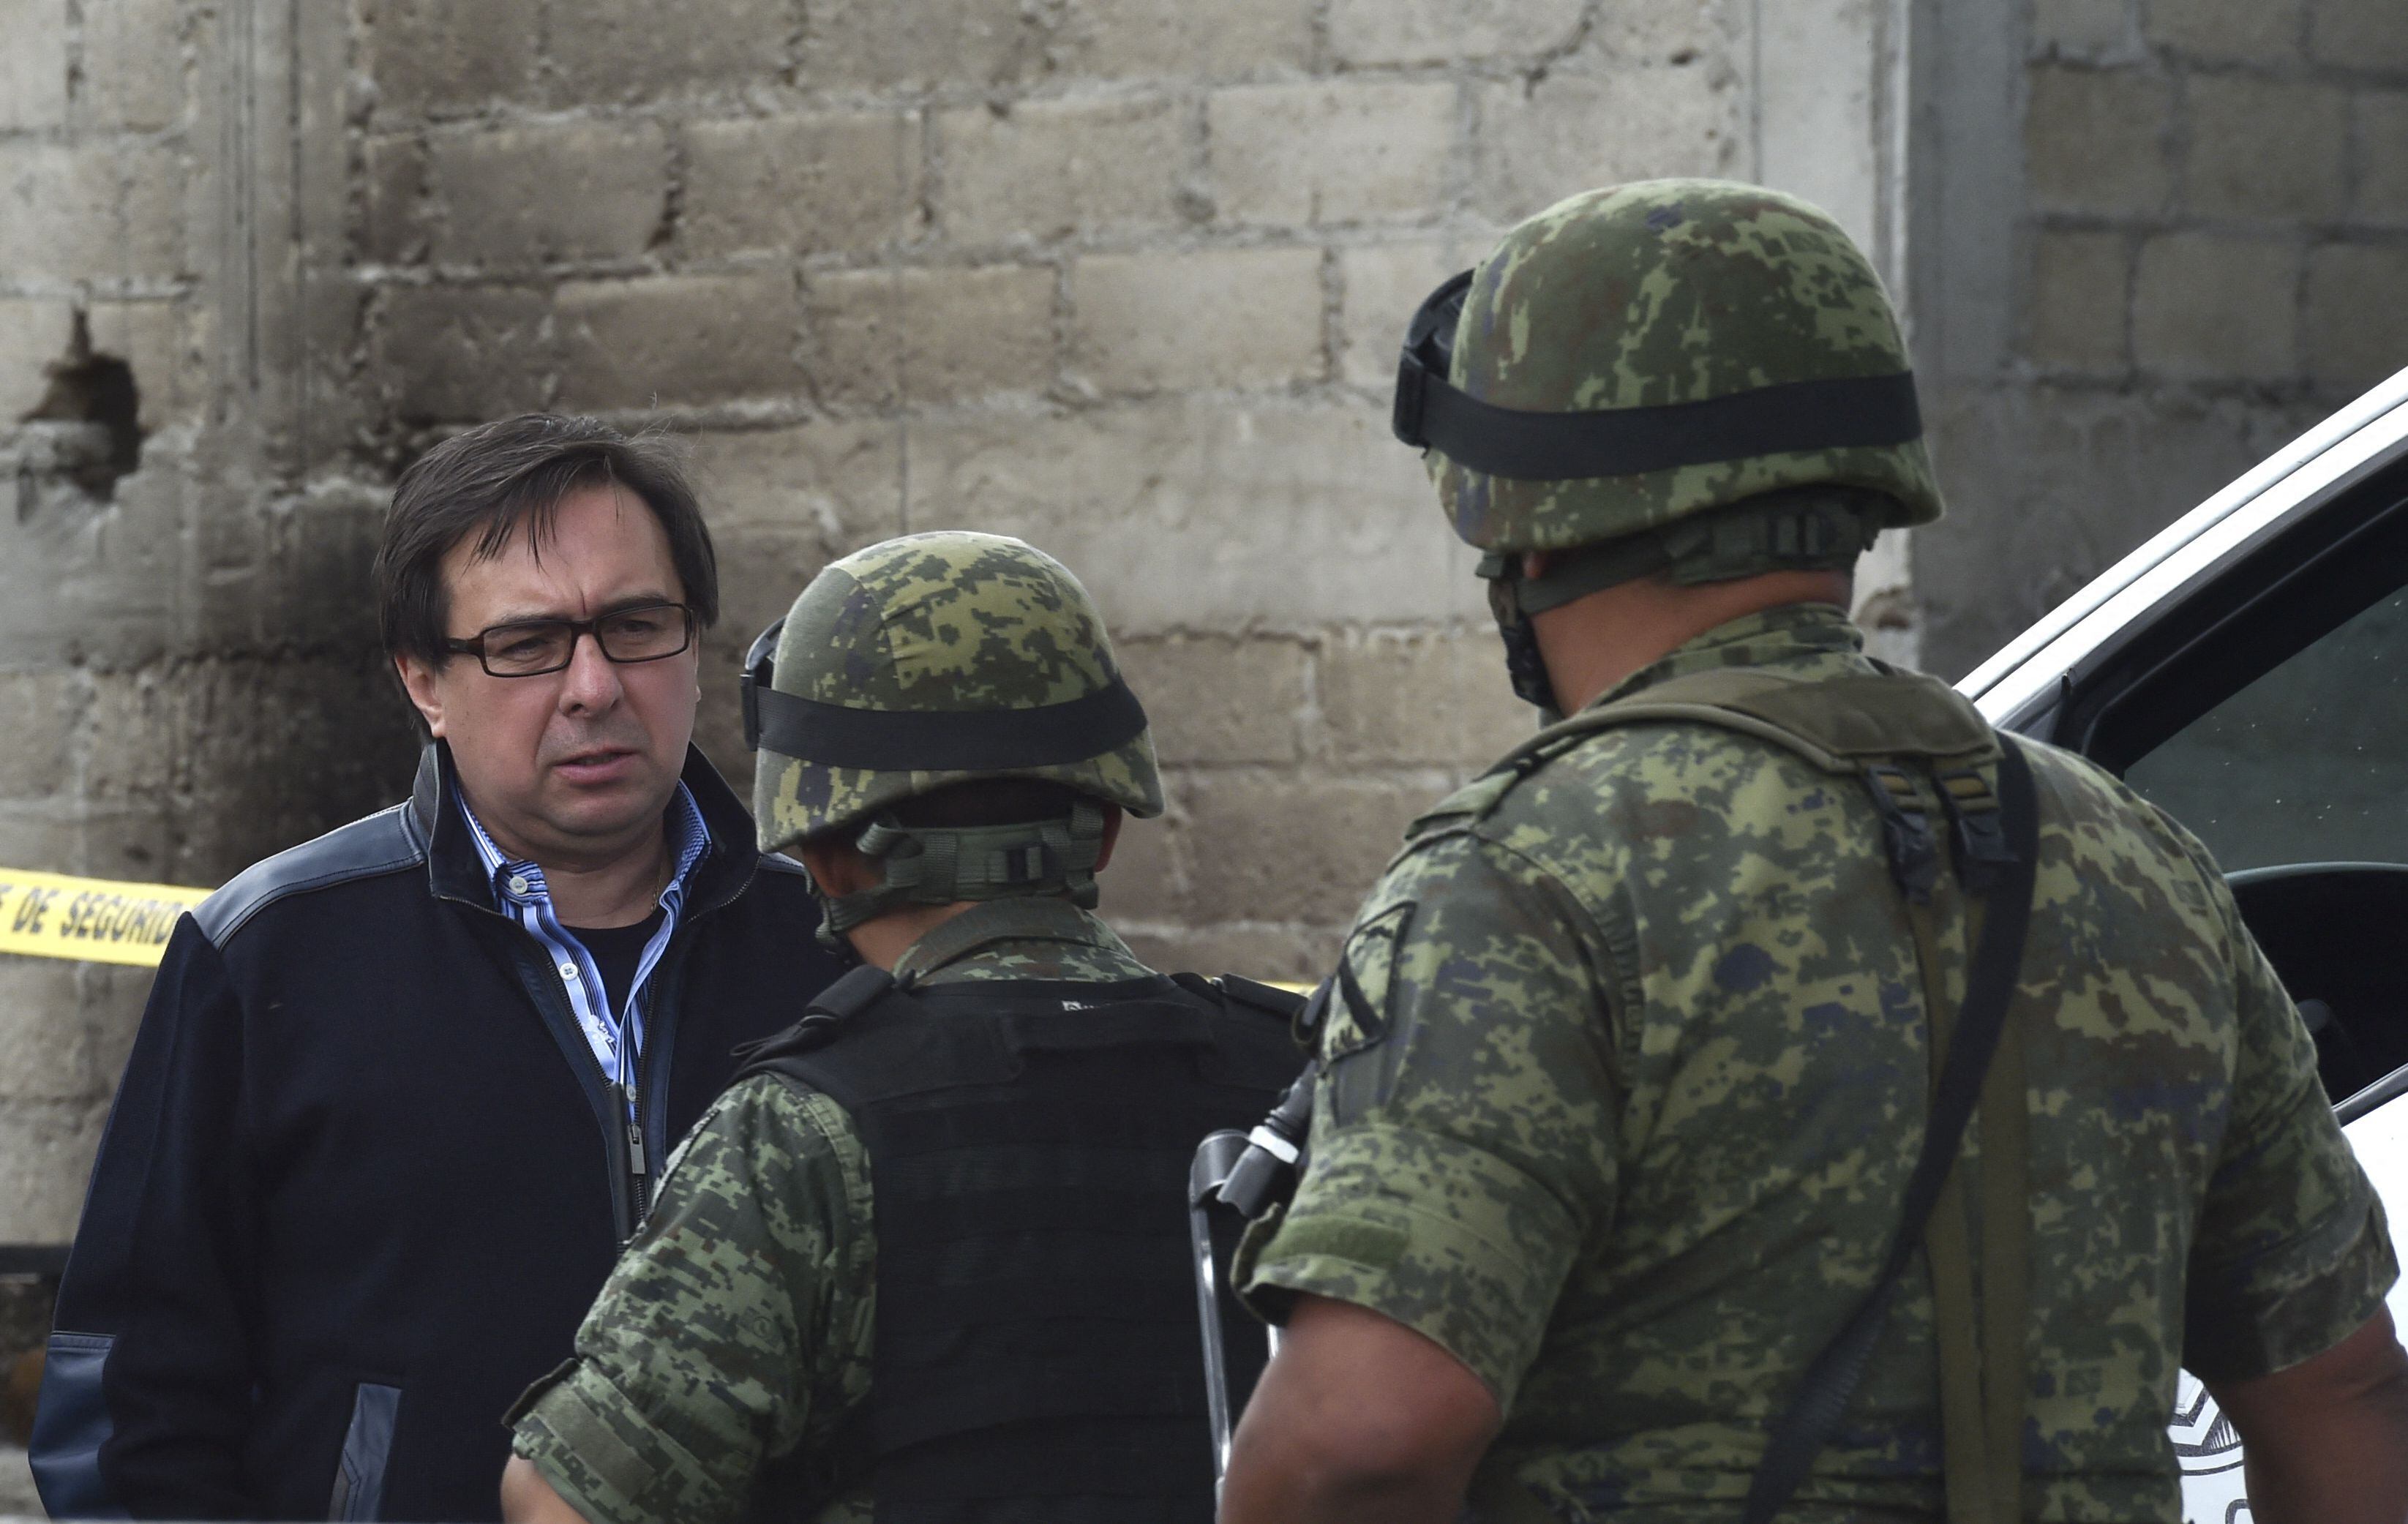 The then director of the Criminal Investigation Agency, Tomás Zeron, arrives at the house at the end of the tunnel through which drug trafficker Joaquín 'El Chapo' Guzmán escaped from the Altiplano prison, on July 12, 2015. (Photo by YURI CORTEZ/AFP).